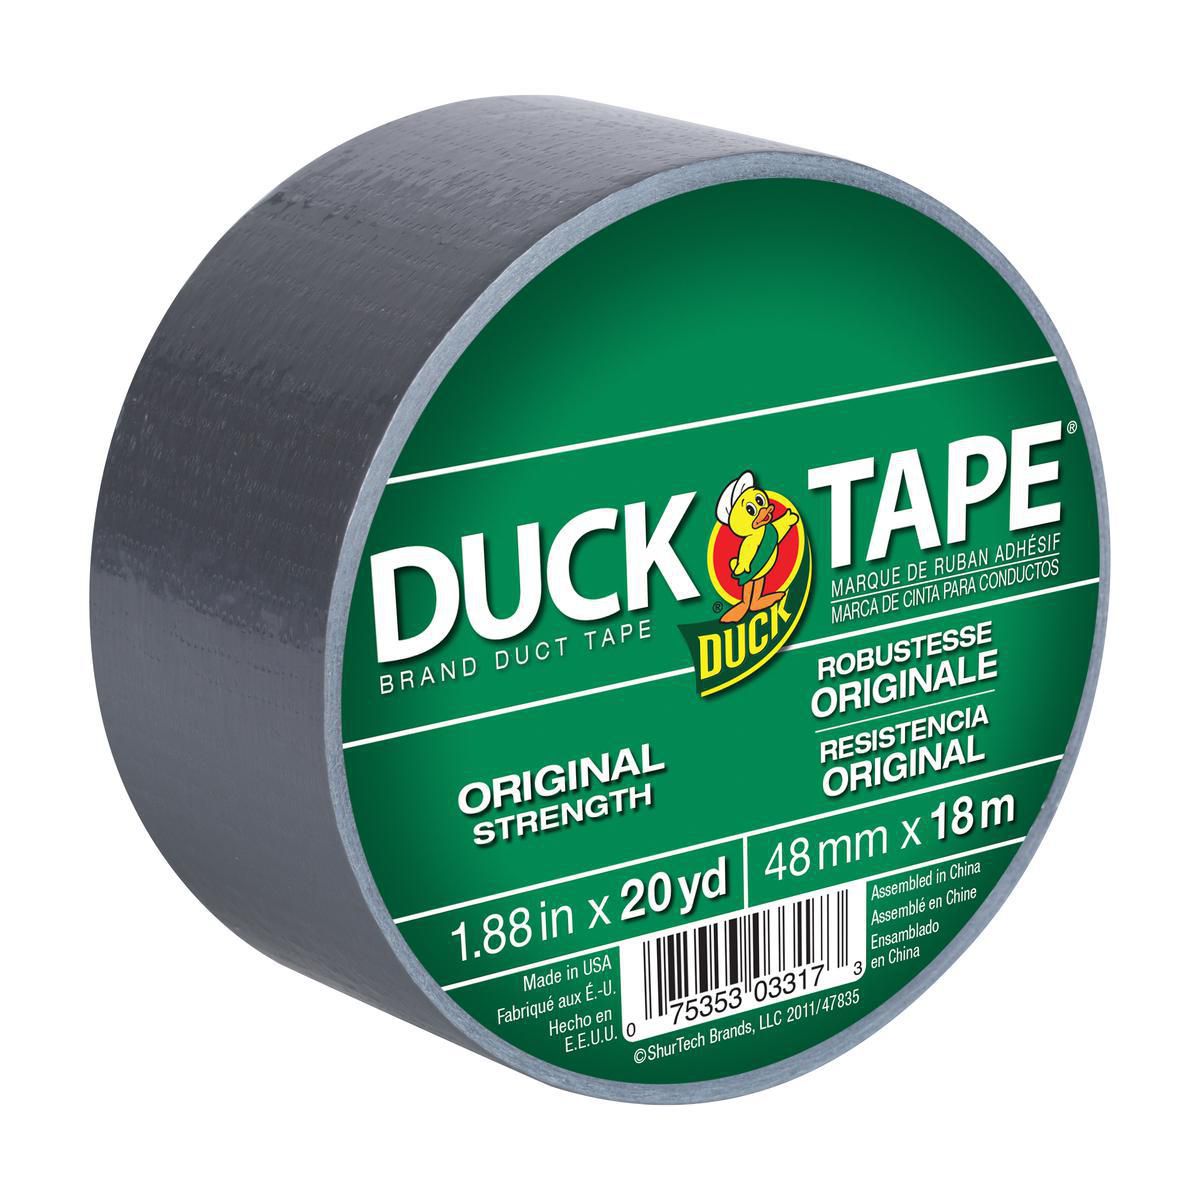 The Original Duck Tape Brand Duct Tape, Silver, 1.88 in. x 20 yd